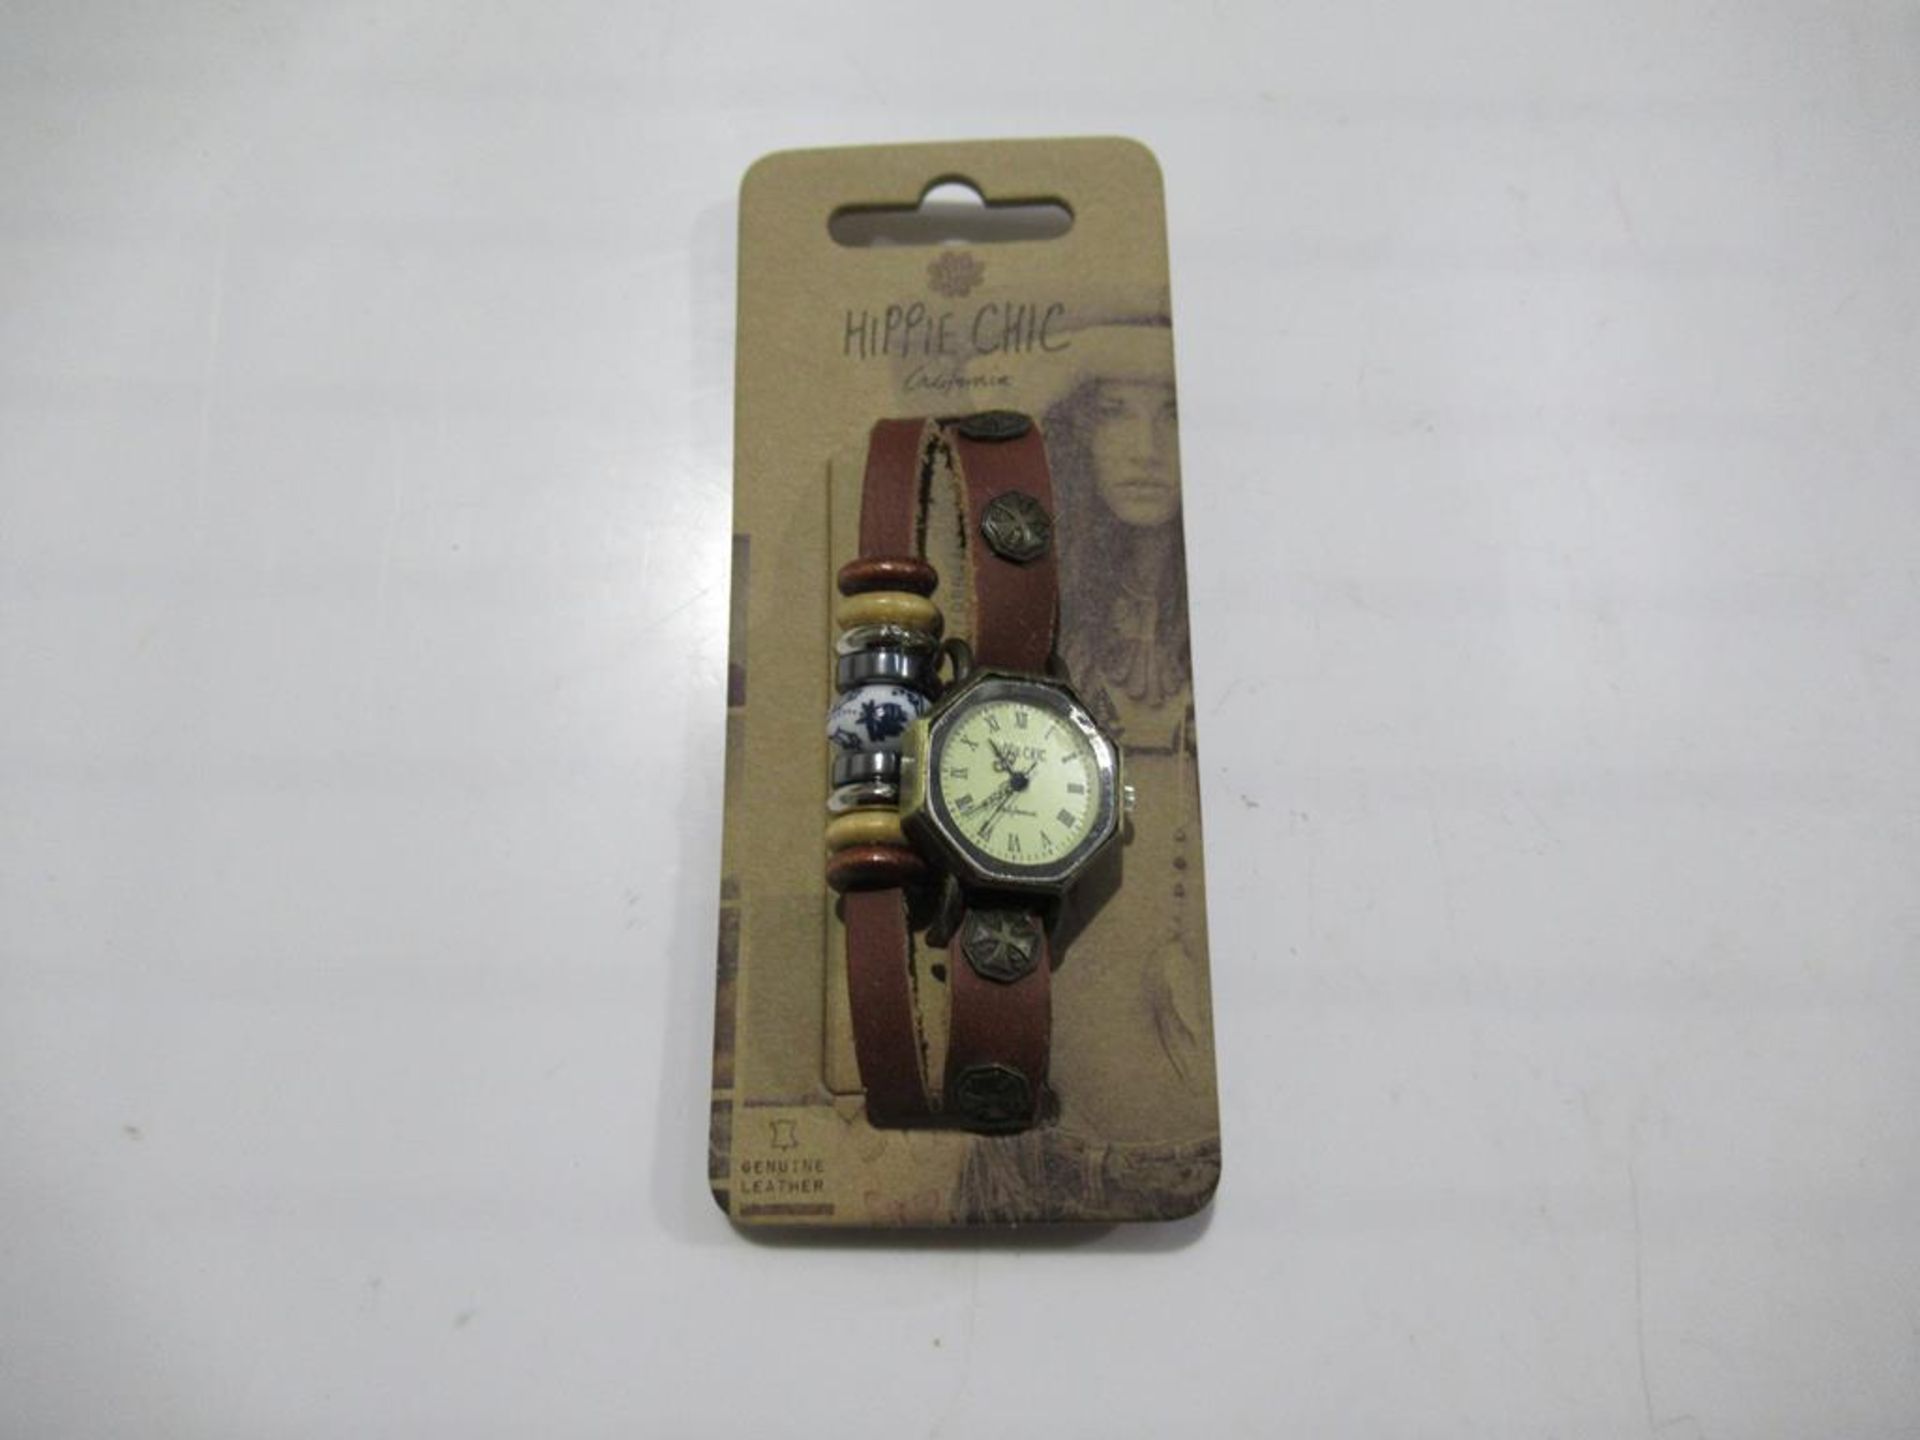 A box of Hippie Chic 'Indie Watch Tan' watches - Image 2 of 3